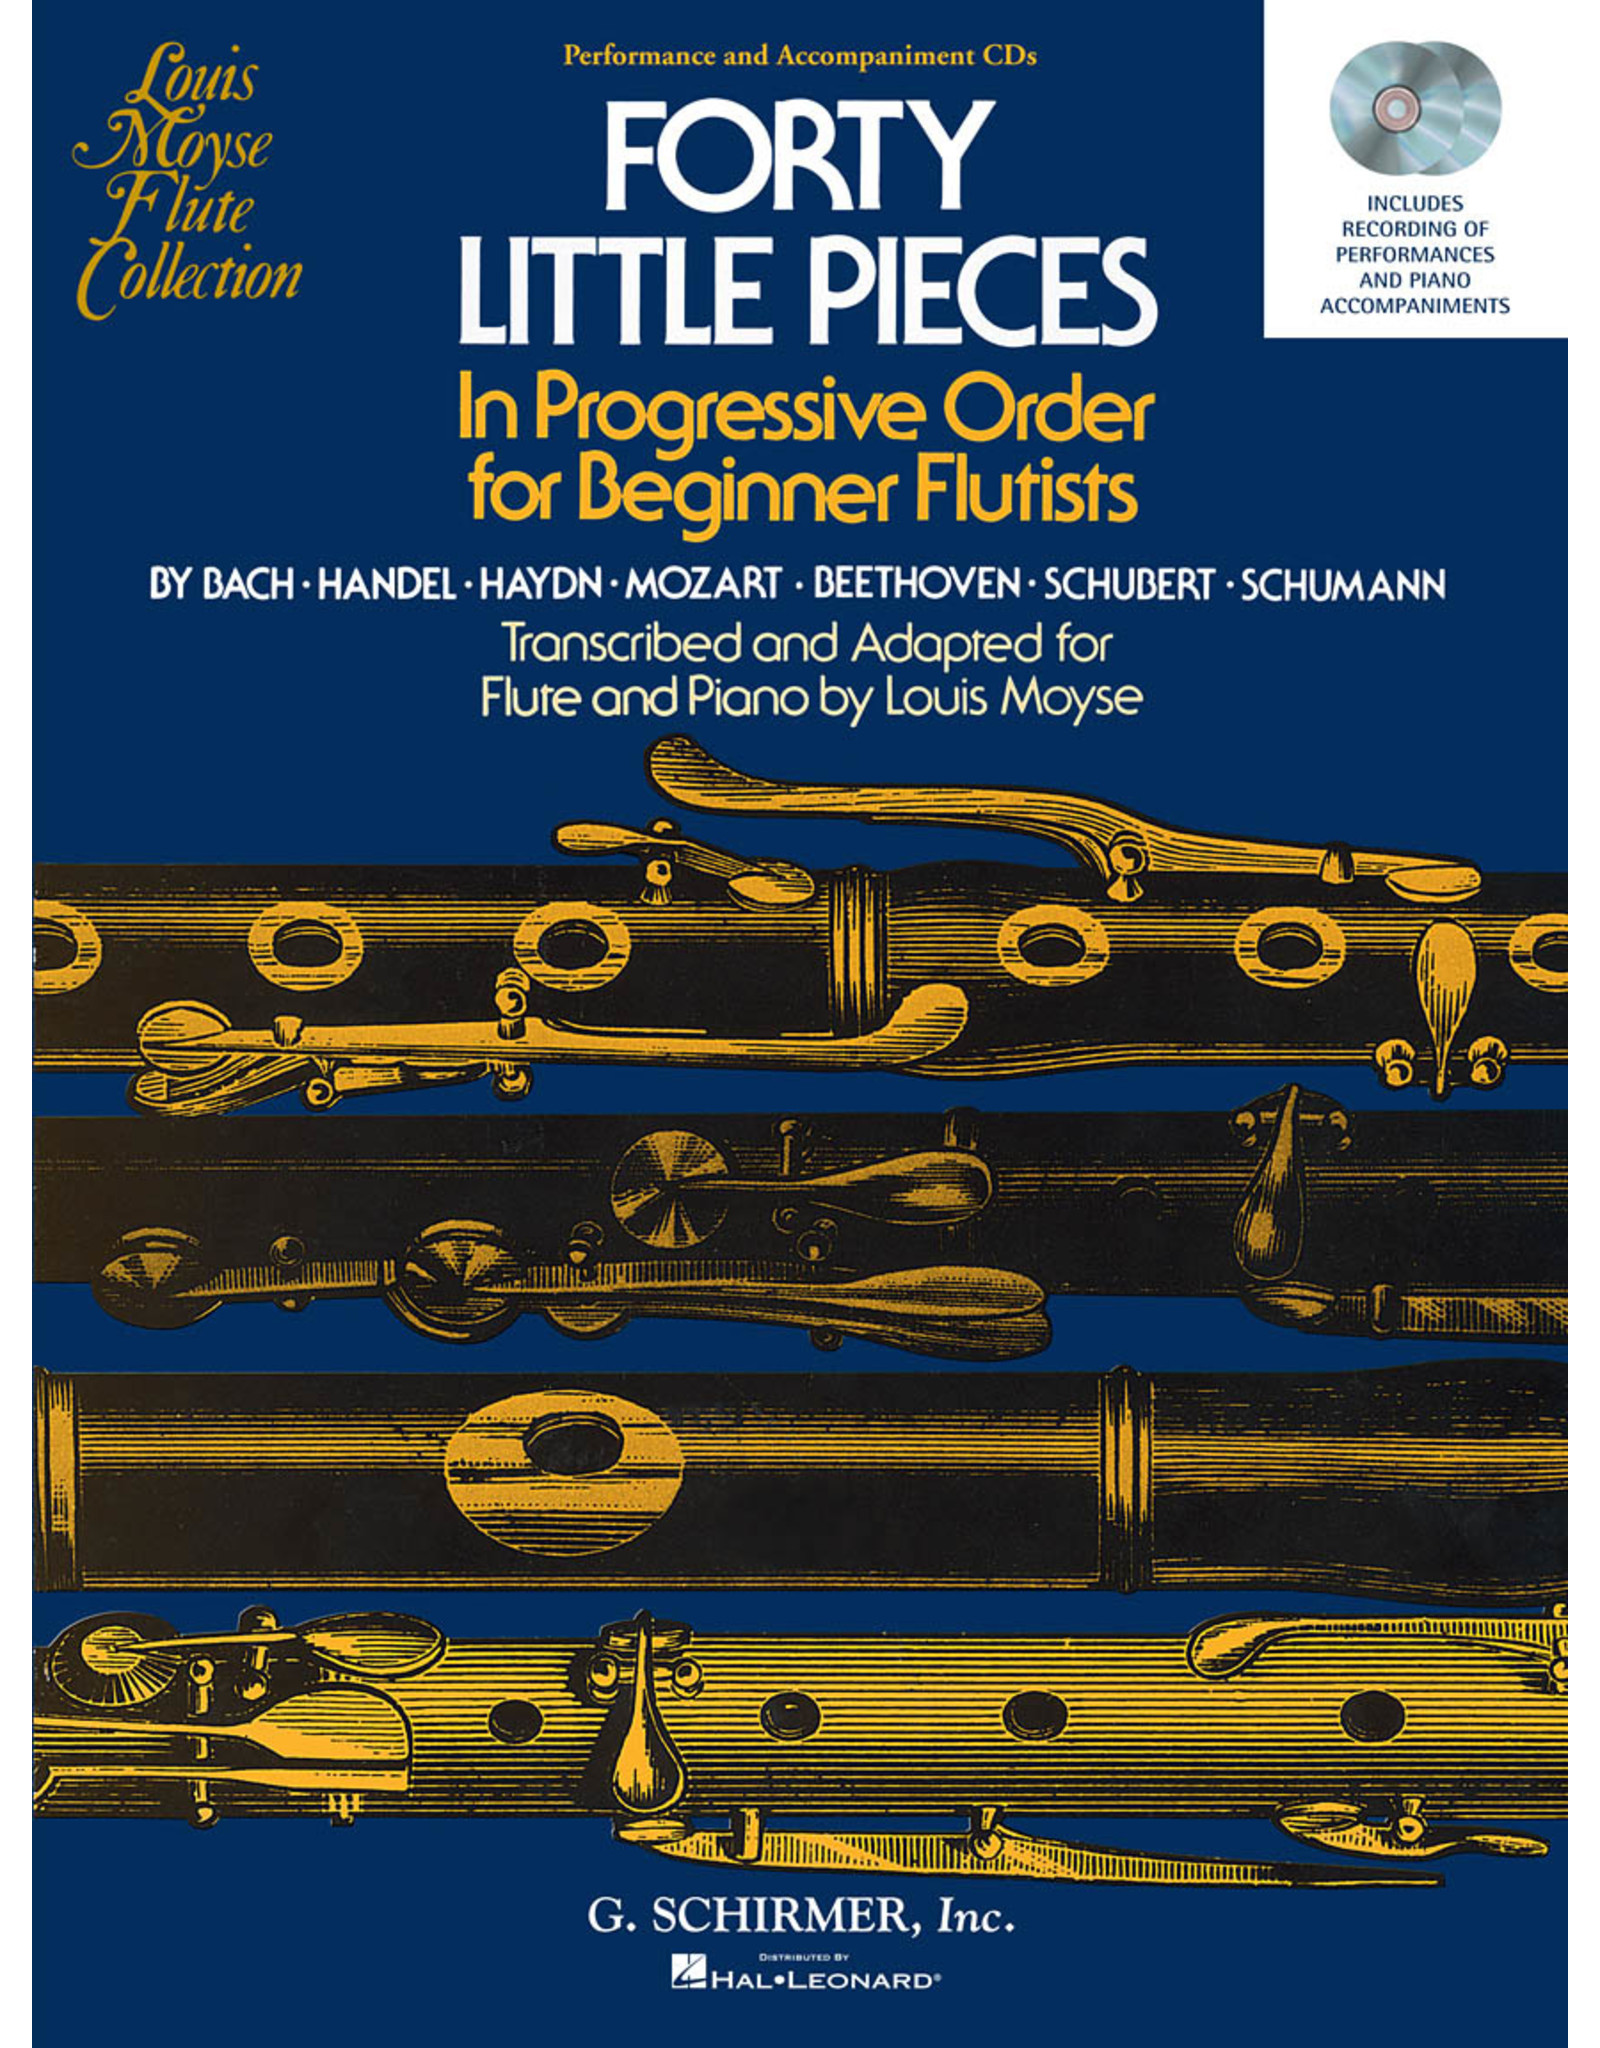 Hal Leonard 40 Little Pieces in Progressive Order for Beginner Flutists Set of Two Enhanced Performance and Accompaniment CDs ed. Louis Moyse Woodwind Solo 2 CDs